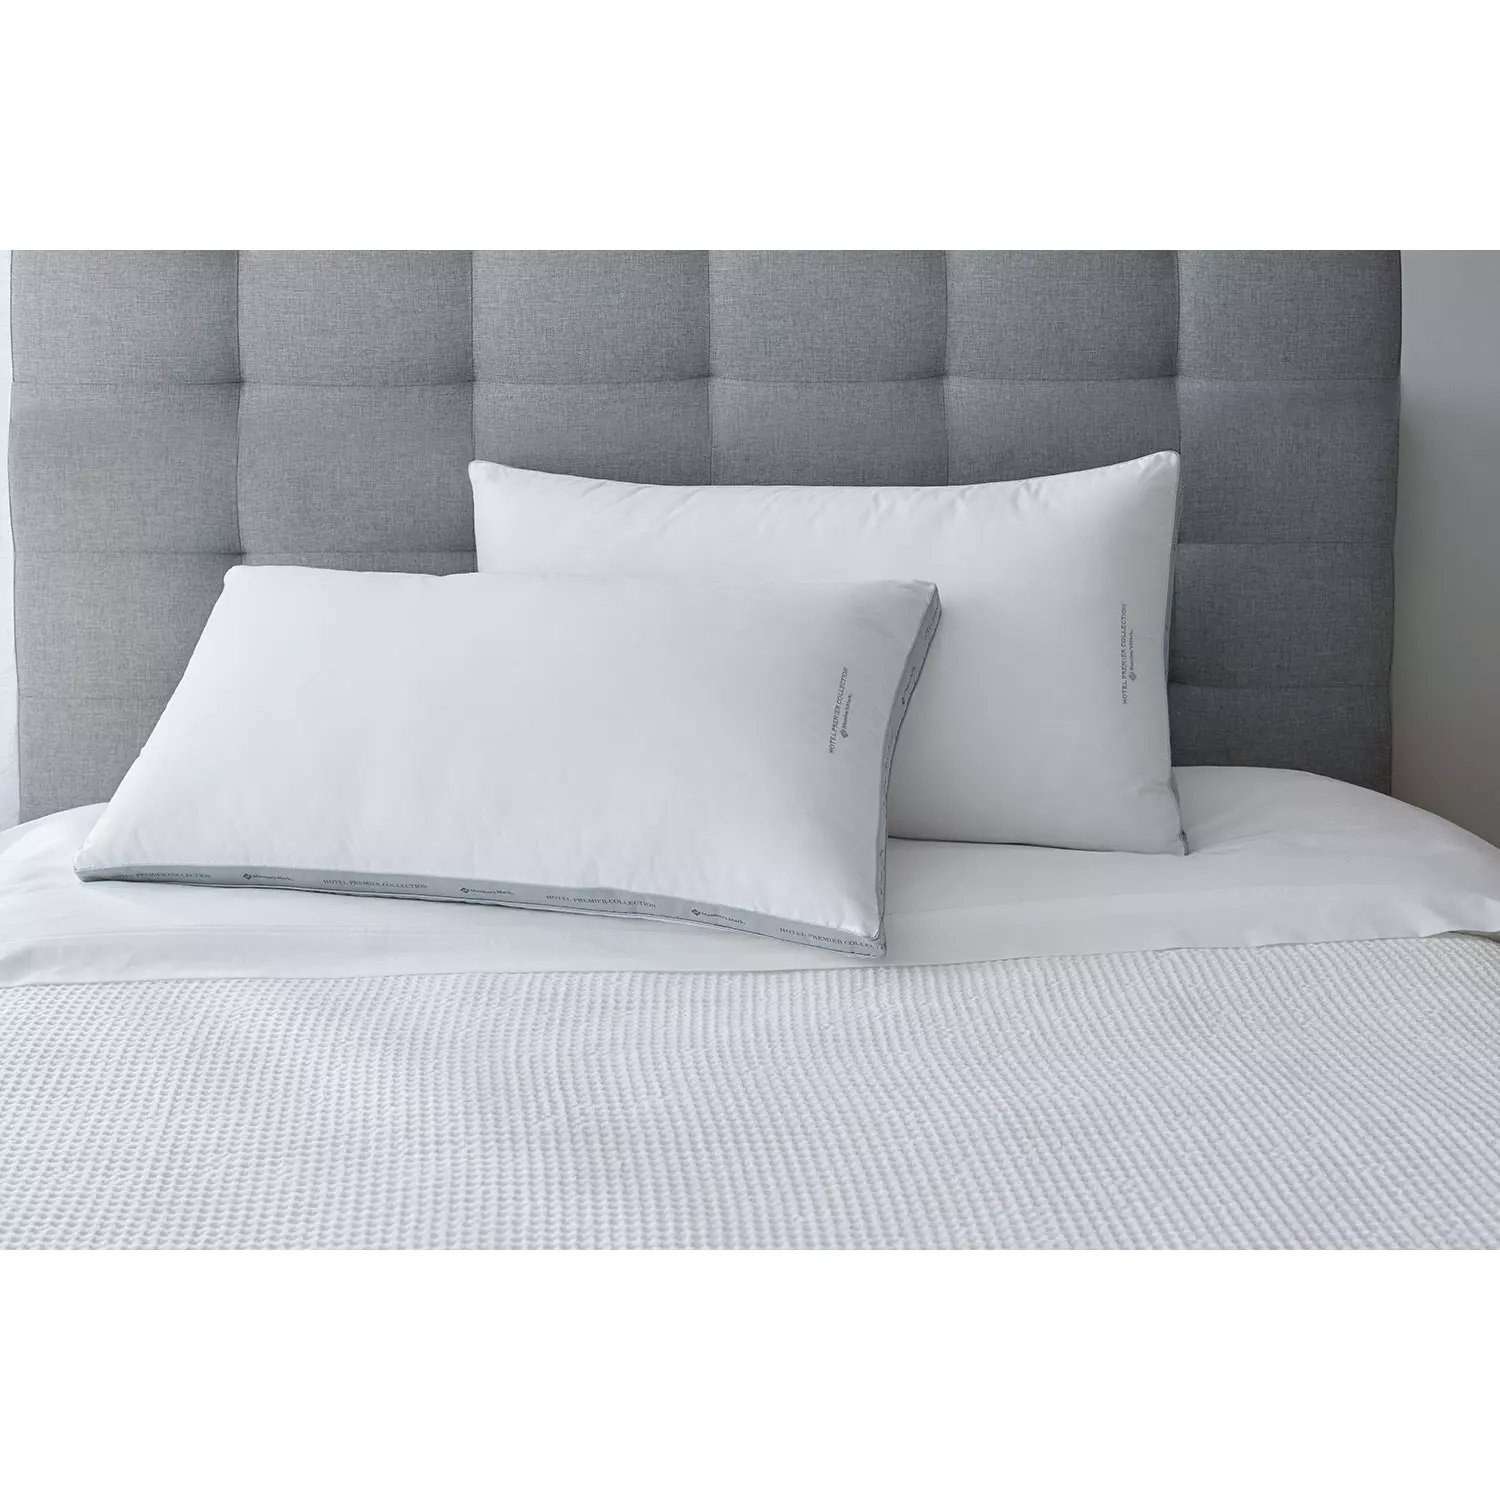 Member's Mark Hotel Premier Collection Bed Pillows, King (Pack of 2)